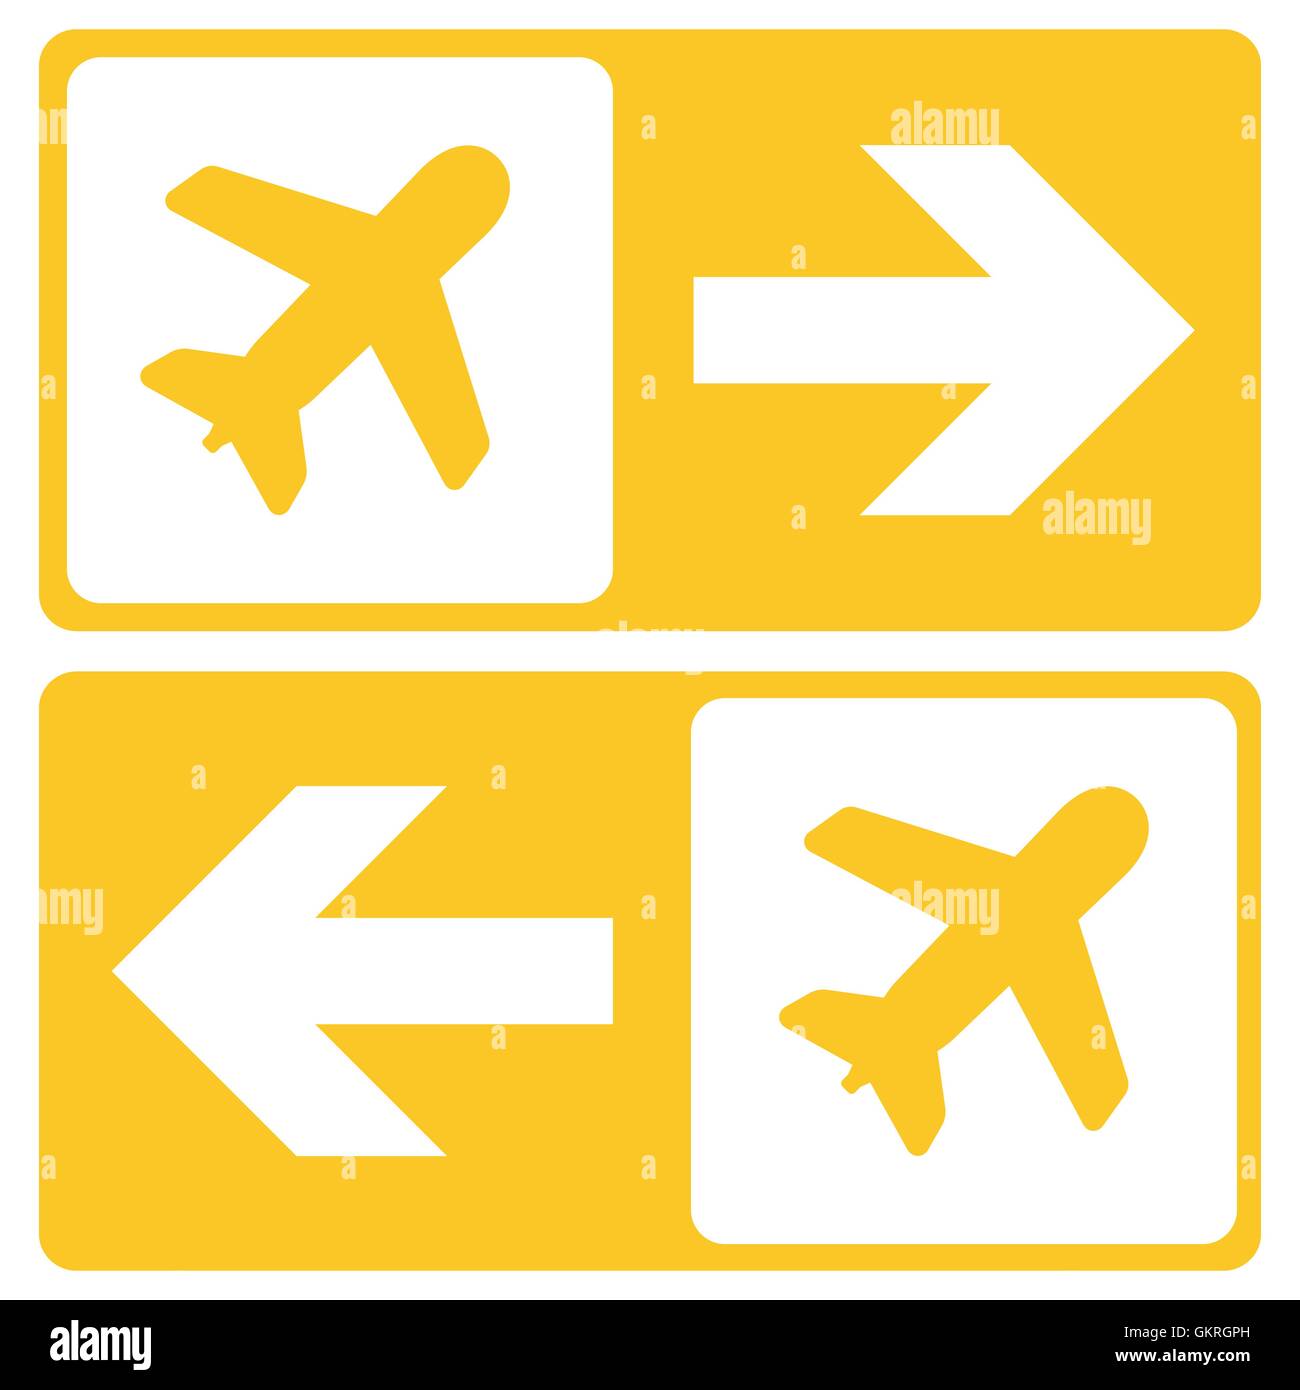 Vector Airport Signs on white background. Airport icon Stock Vector